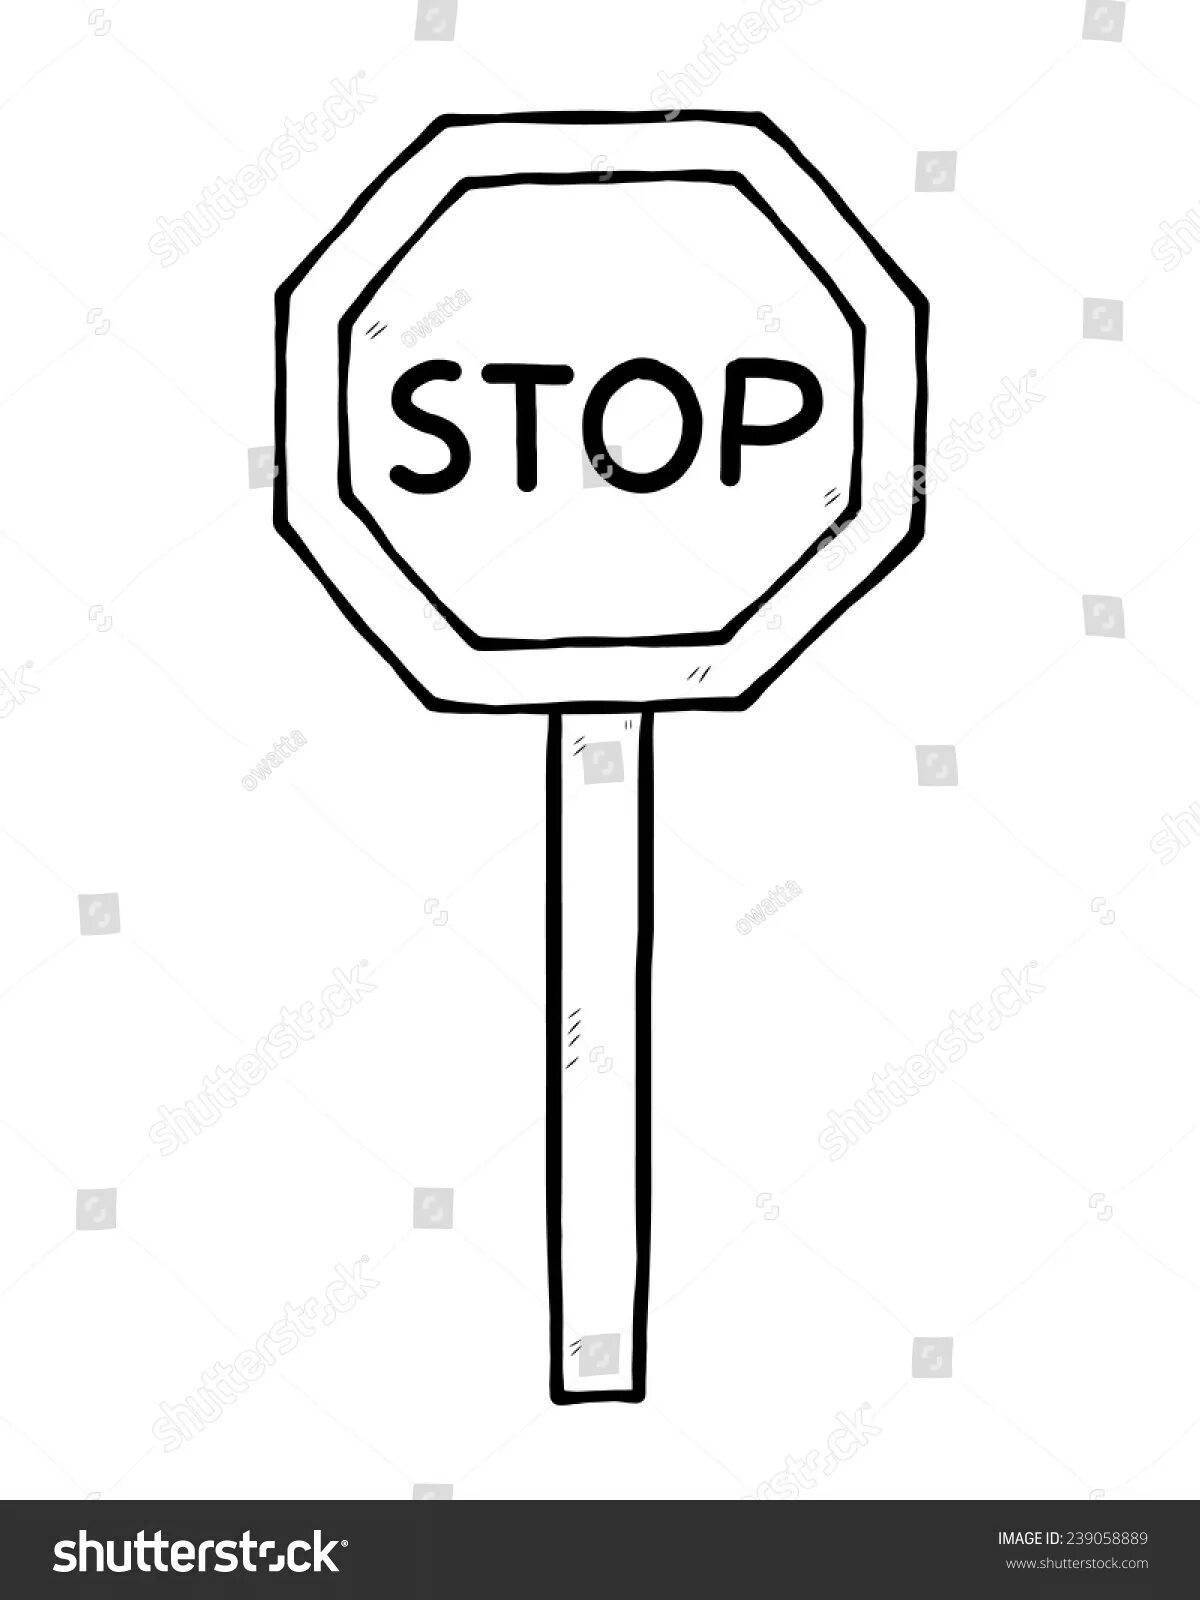 Coloring book bold stop sign